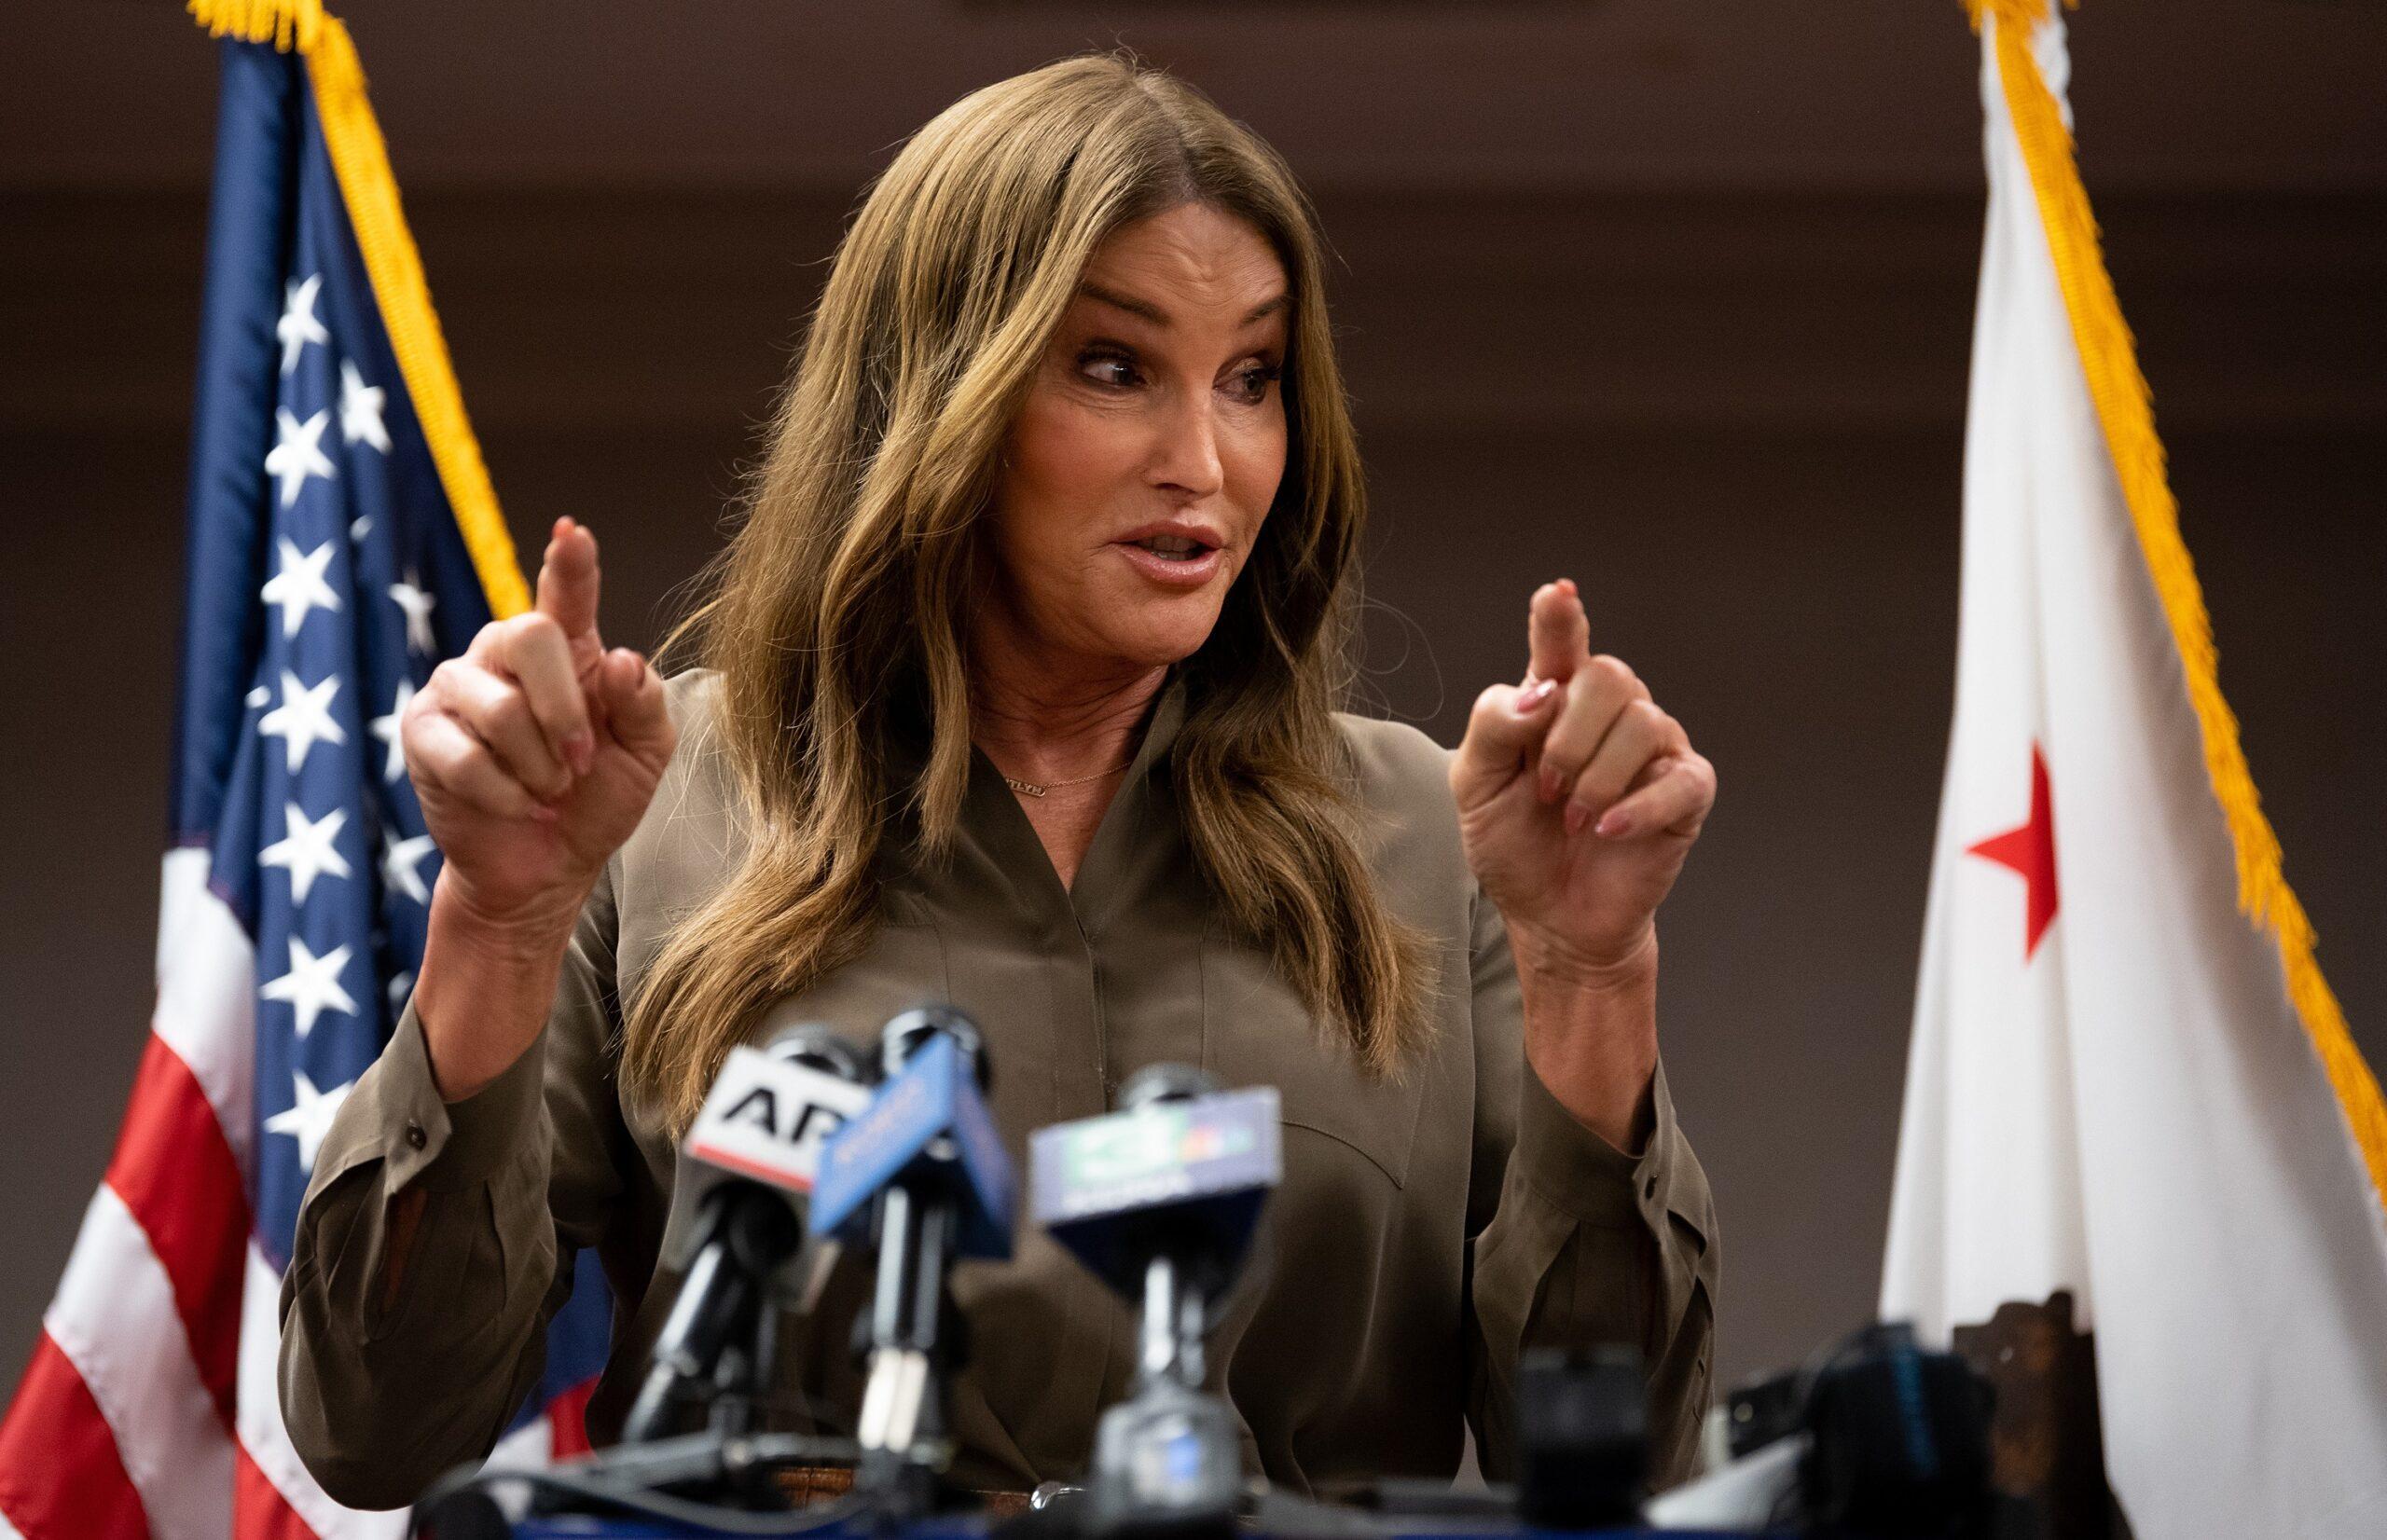 Caitlyn Jenner Candidate For Governor Meets The Media